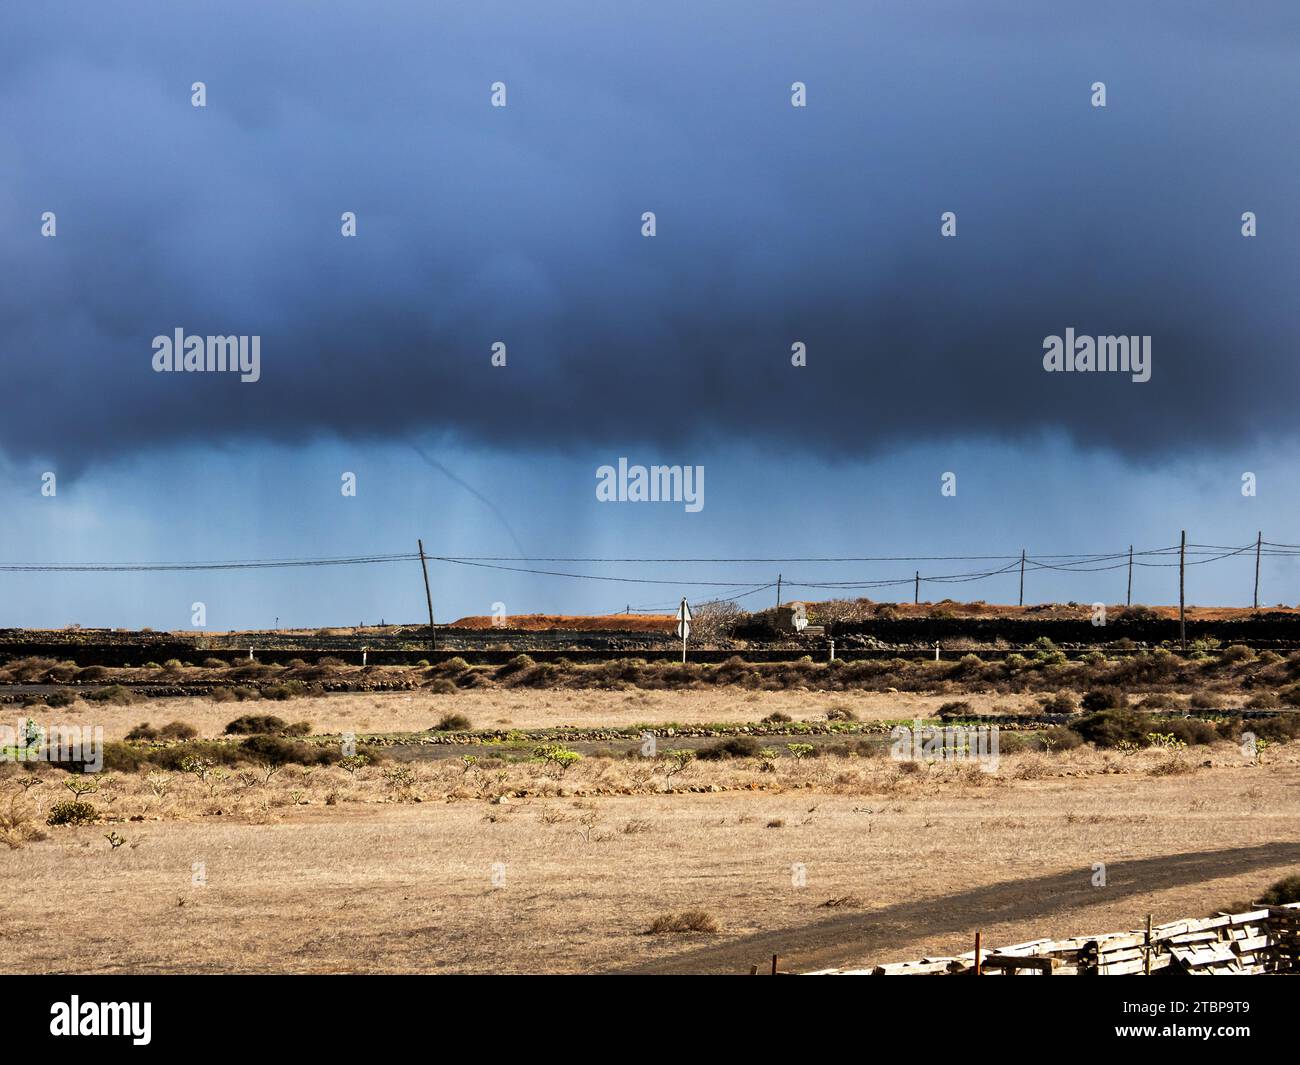 A tornado over the coast from Teguise on Lanzarote, Canary Islands. Stock Photo